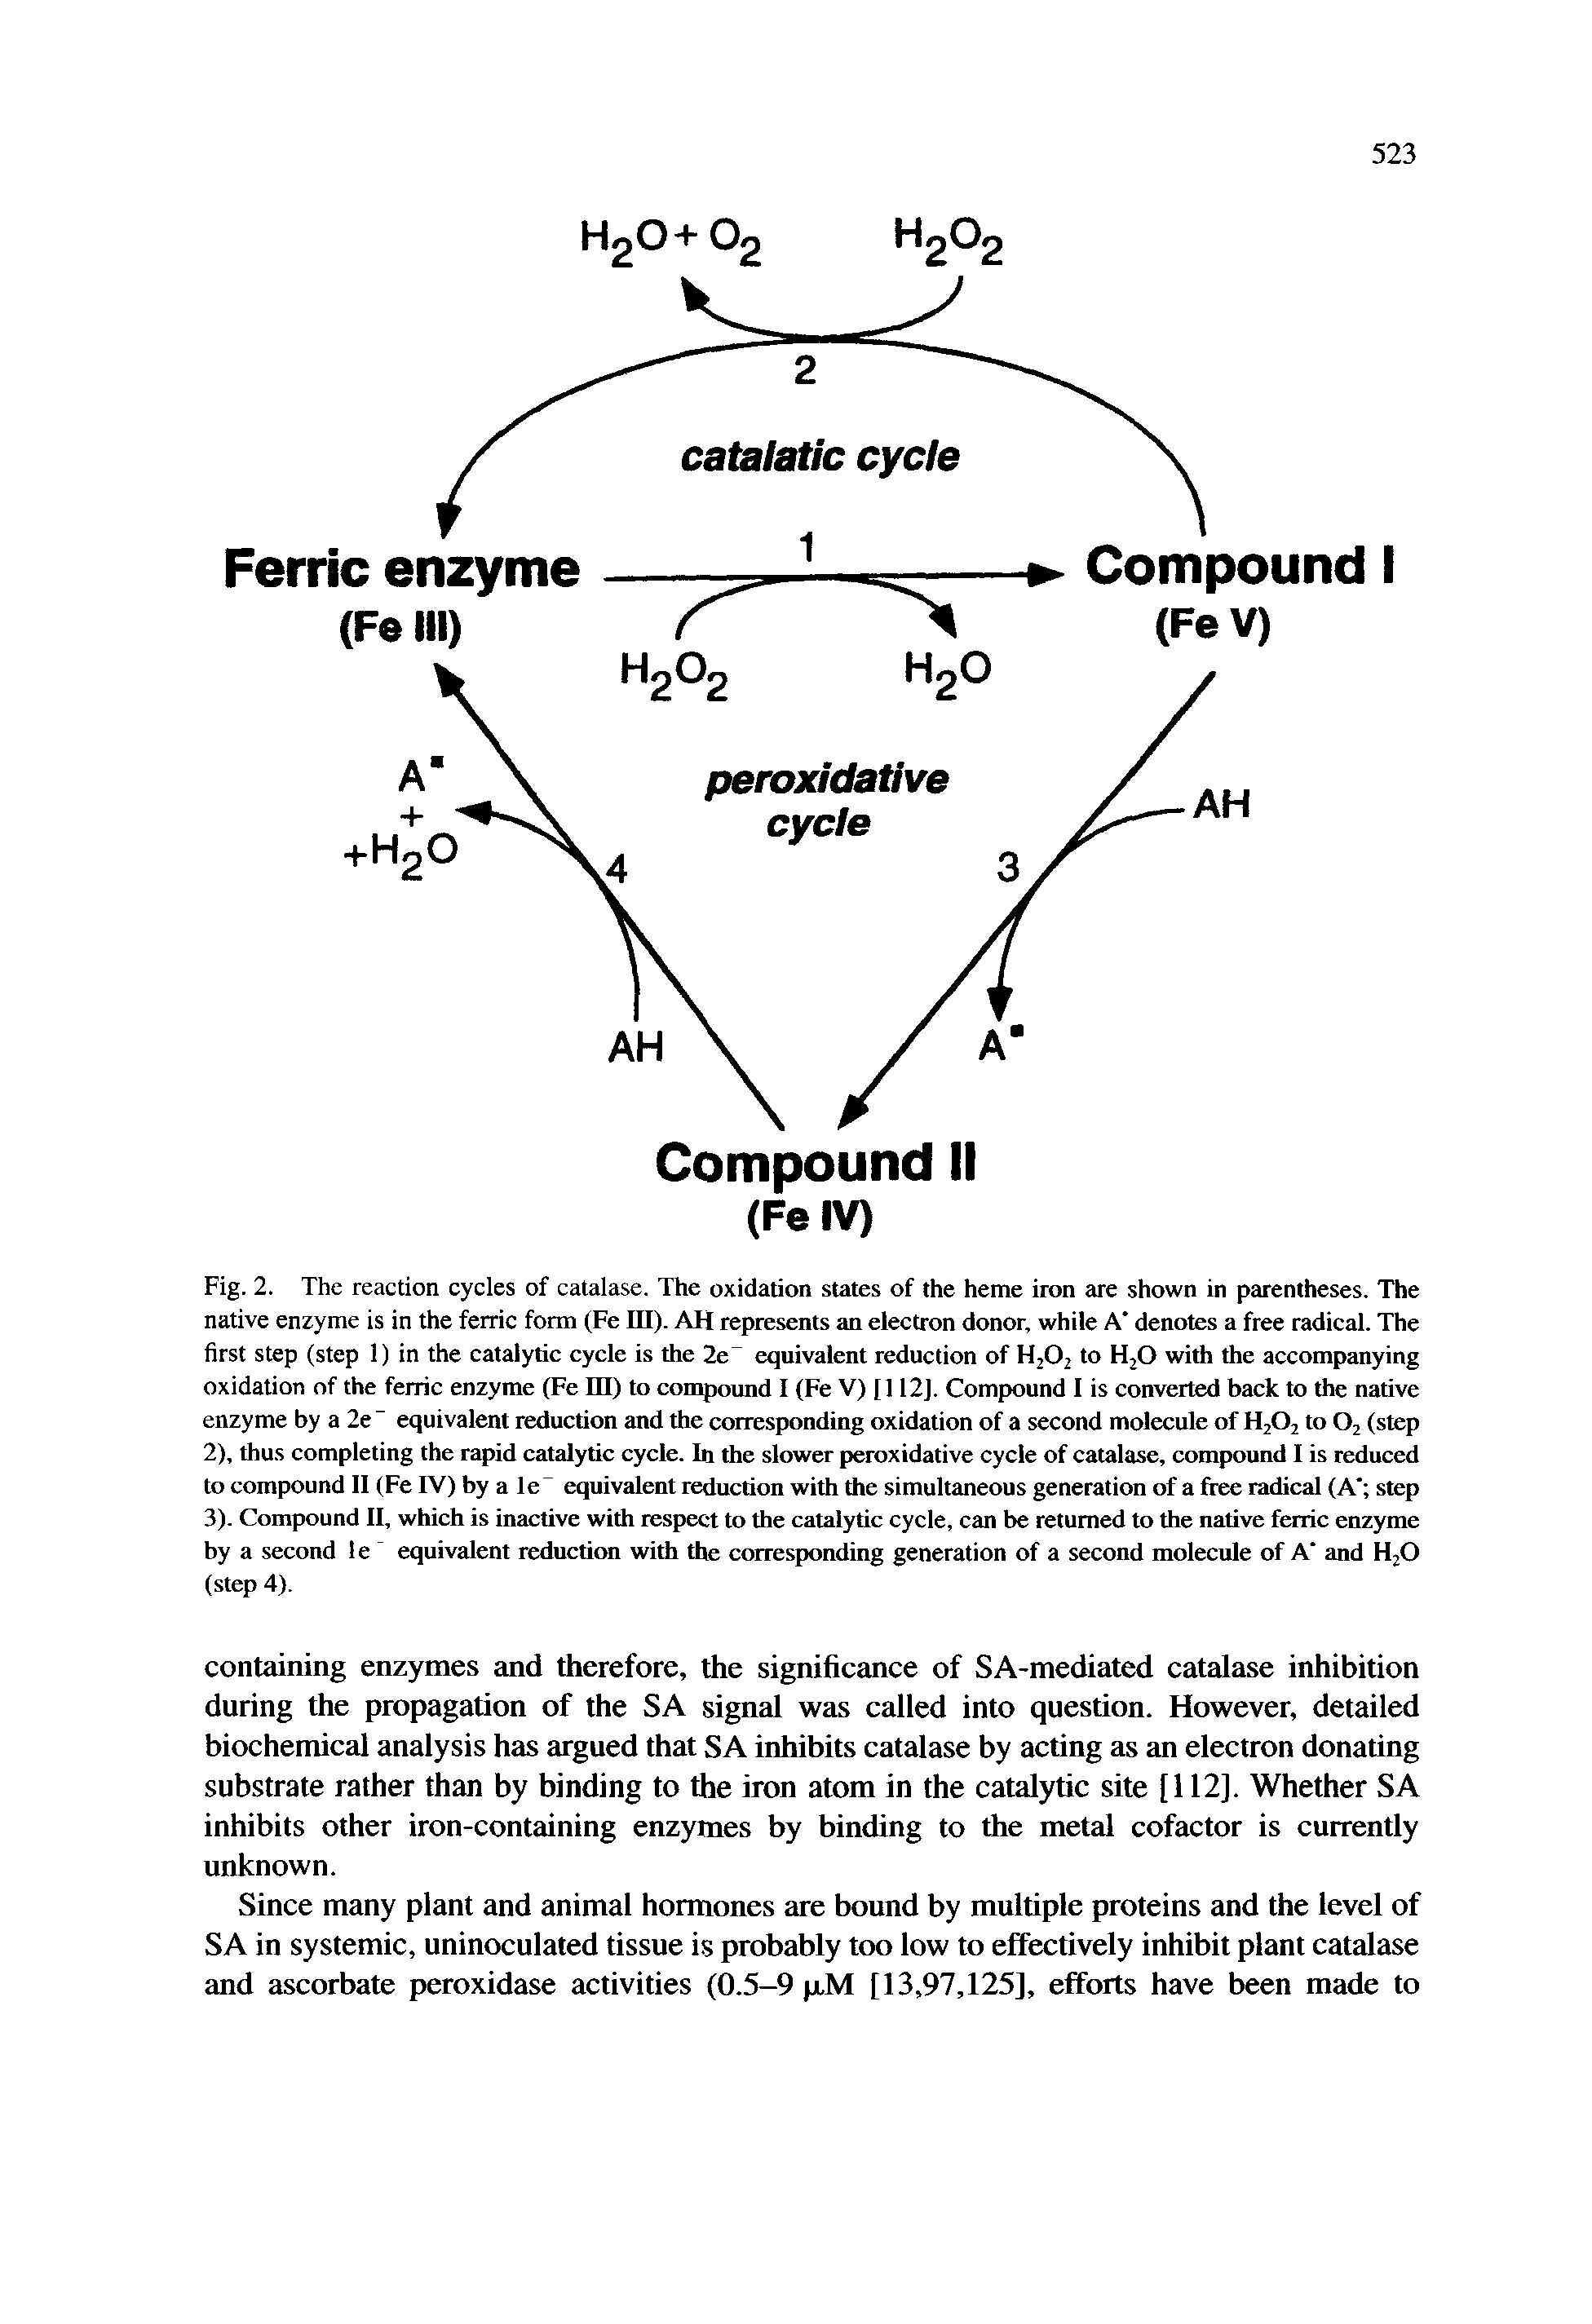 Fig. 2. The reaction cycles of catalase. The oxidation states of the heme iron are shown in parentheses. The native enzyme is in the ferric form (Fe III). AH represents an electron donor, while A denotes a free radical. The first step (step 1) in the catalytic cycle is the 2e equivalent reduction of HjOj to HjO with the accompanying oxidation of the ferric enzyme (Fe HI) to compound I (Fe V) [112]. Compound I is converted back to the native enzyme by a 2e " equivalent reduction and the corresponding oxidation of a second molecule of HjOj to O2 (step...